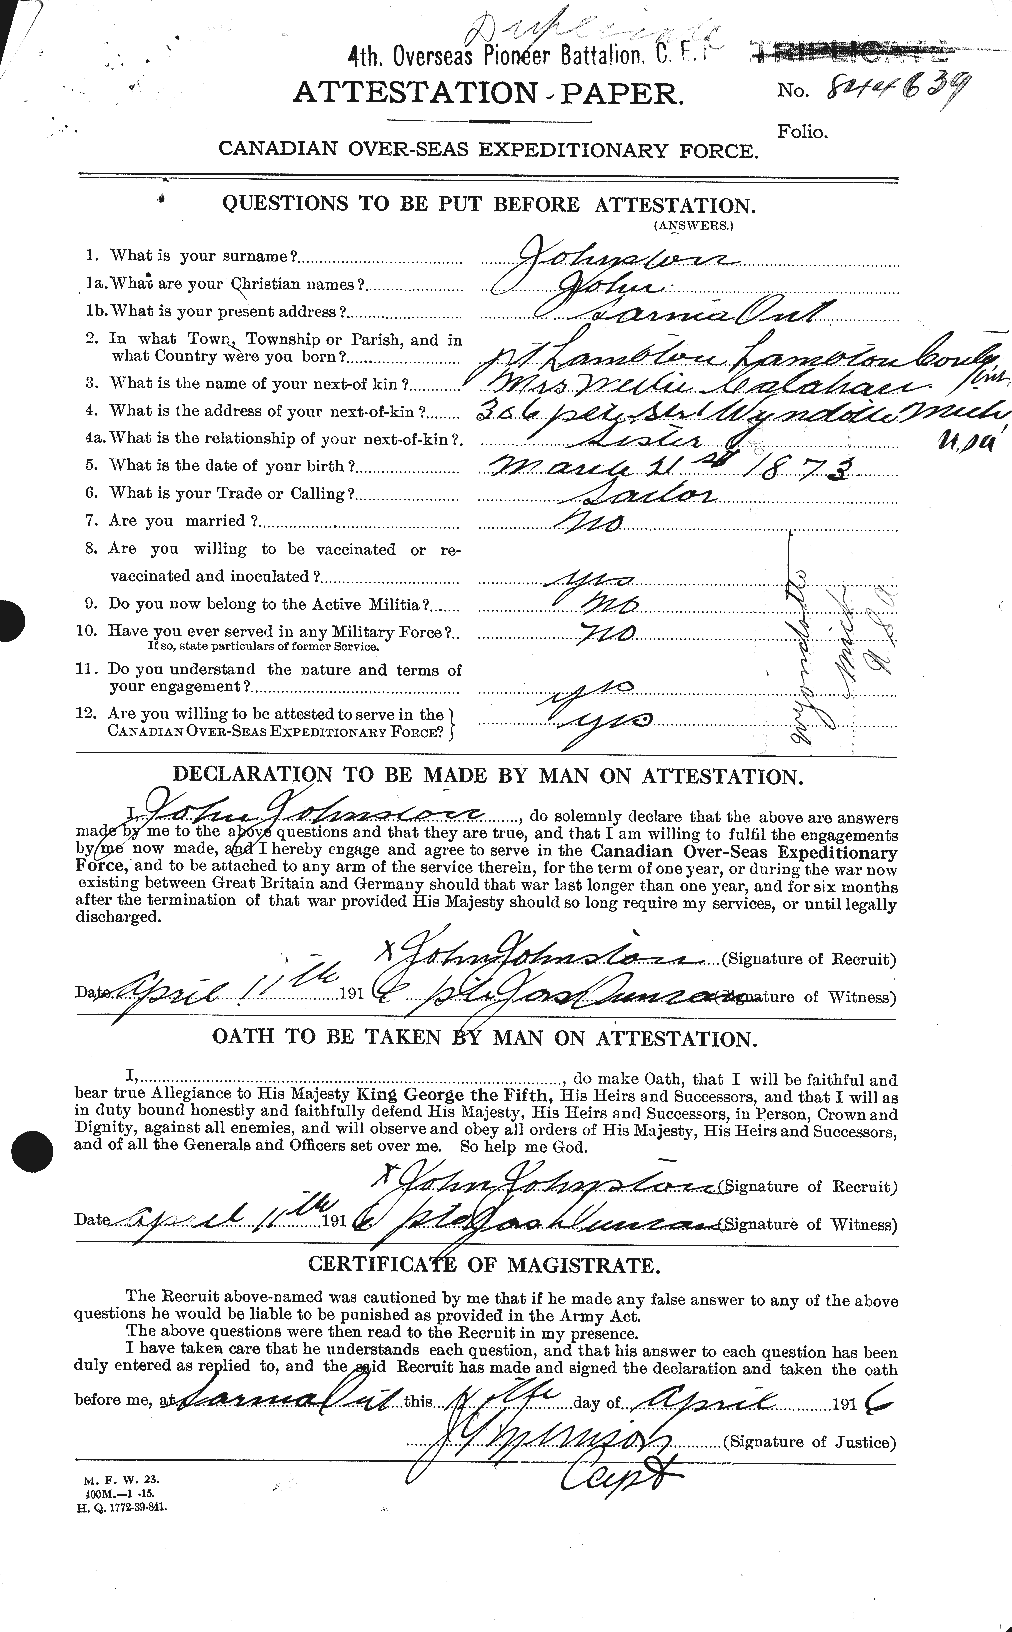 Personnel Records of the First World War - CEF 422798a